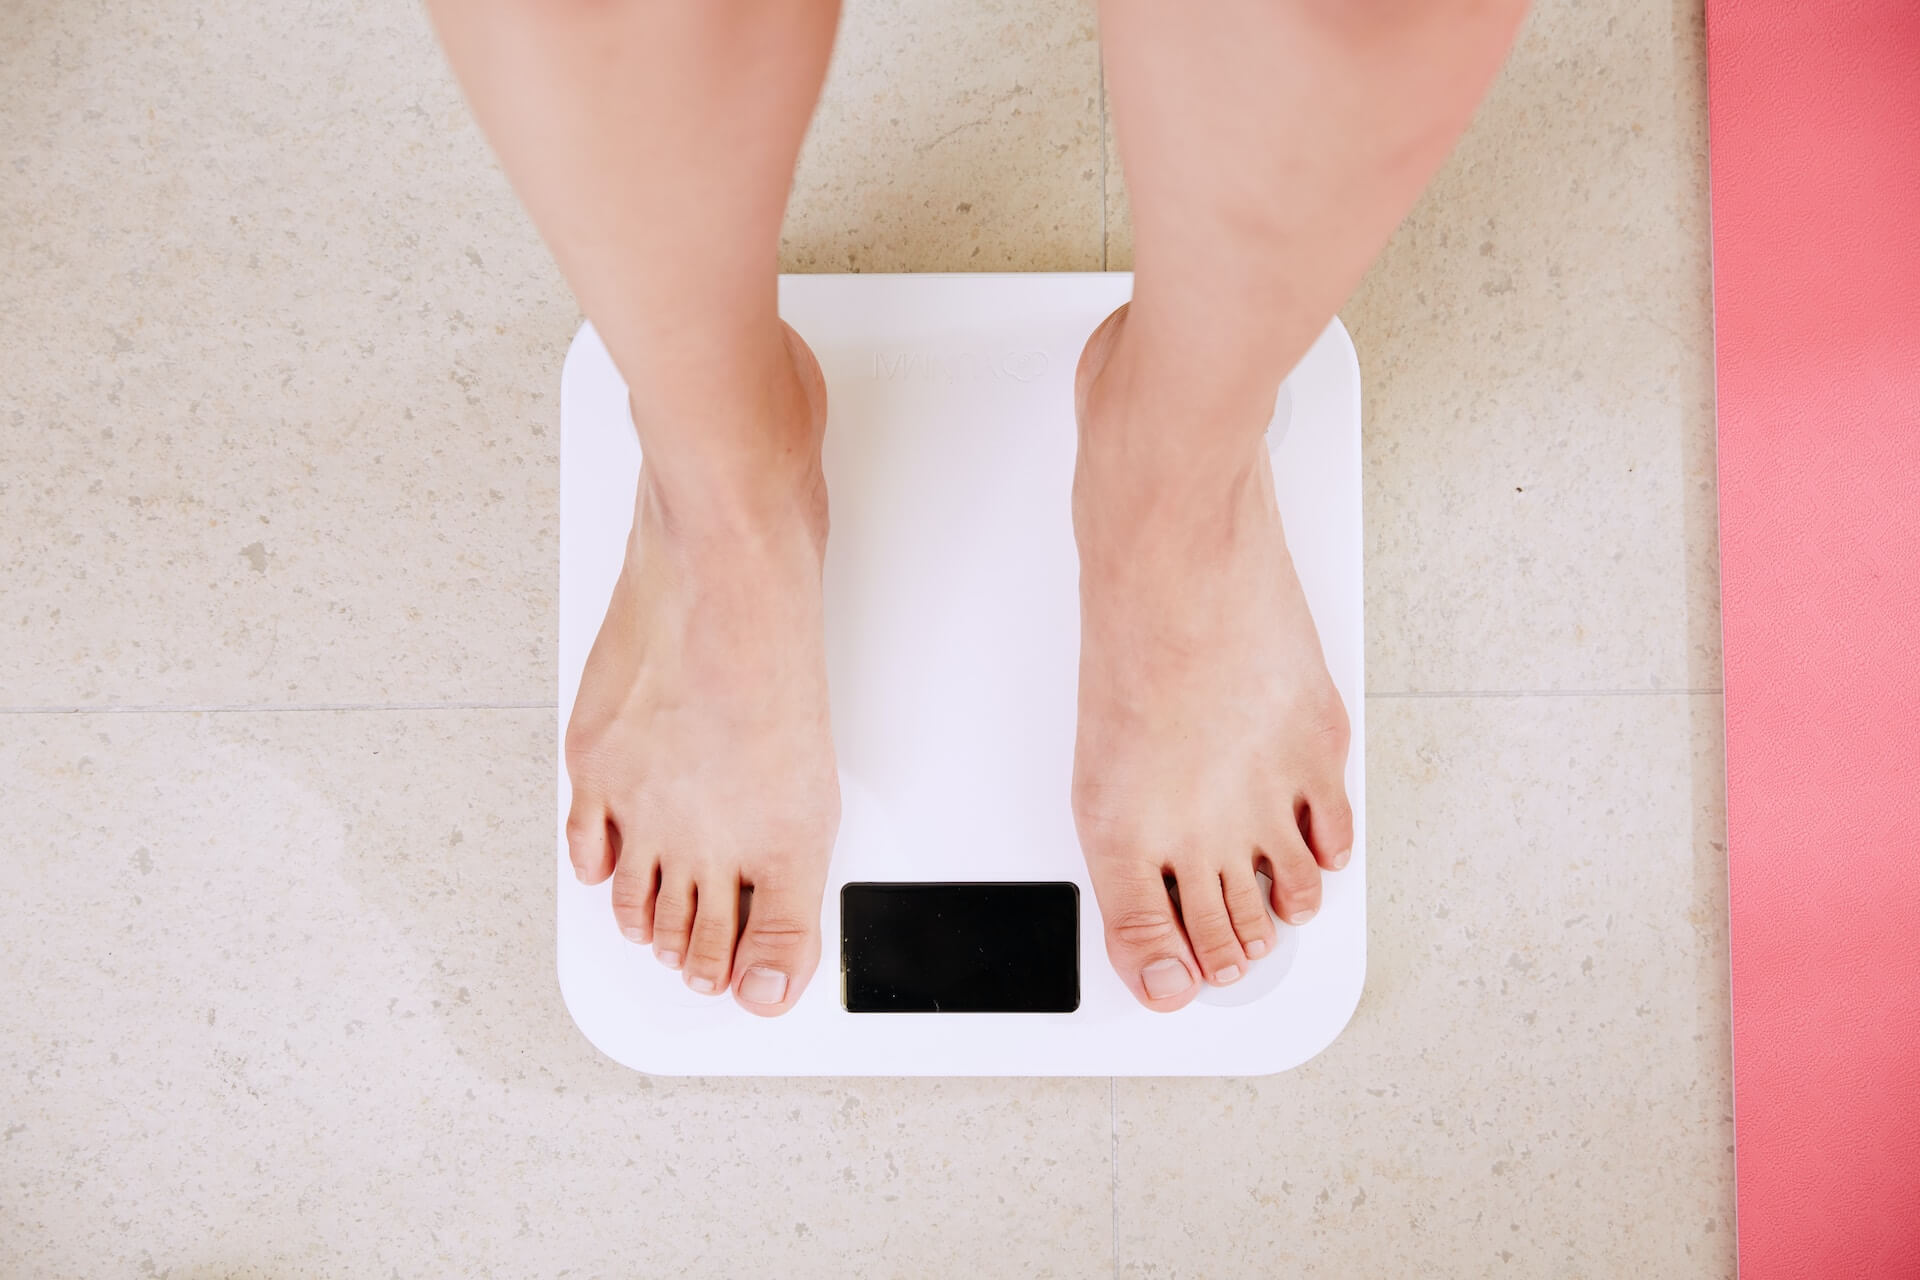 Five Common Reasons Why You’re Not Losing Weight Easily